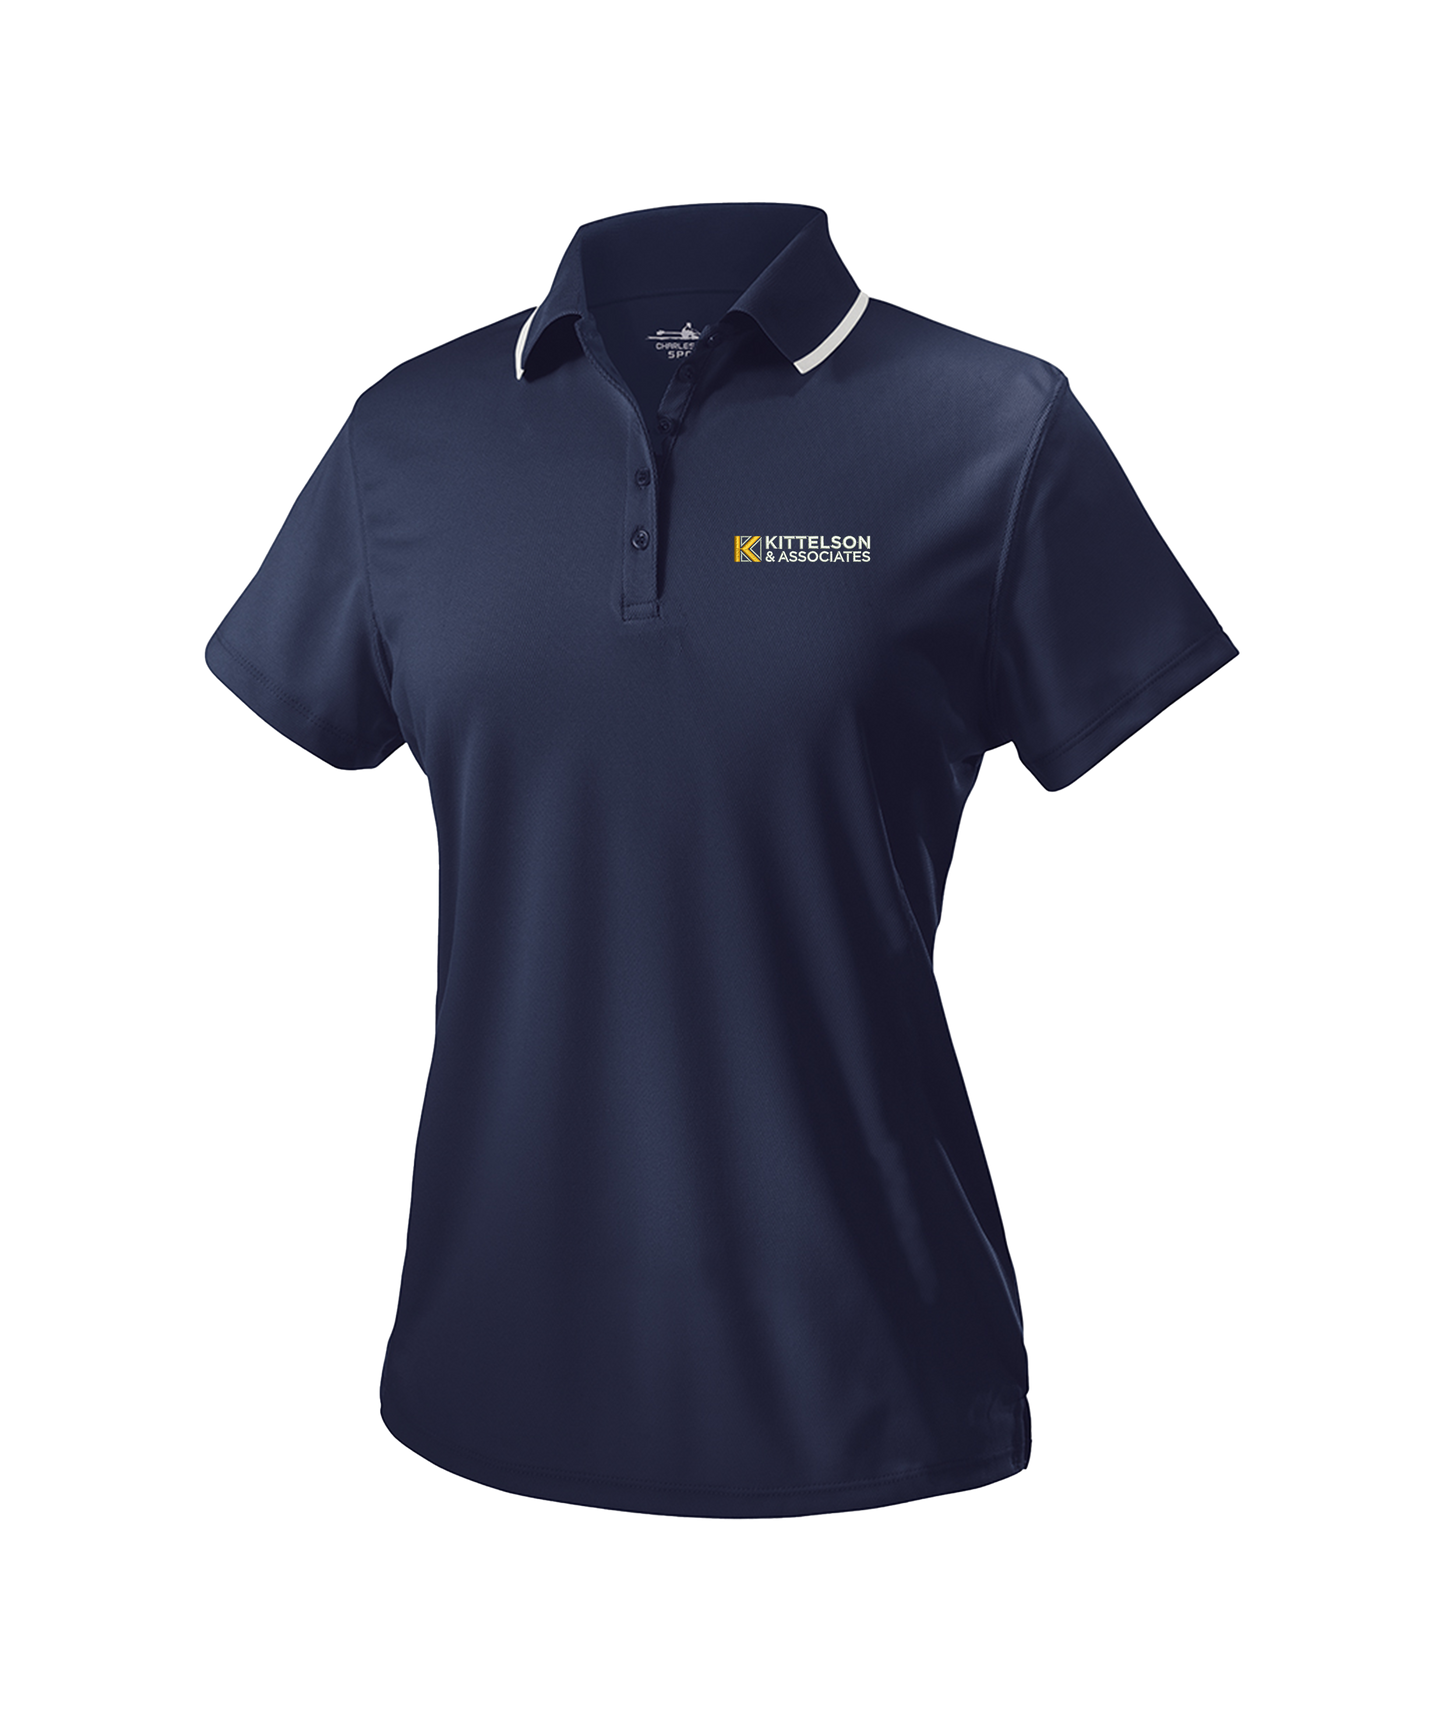 Charles River Women's Classic Solid Wicking Polo